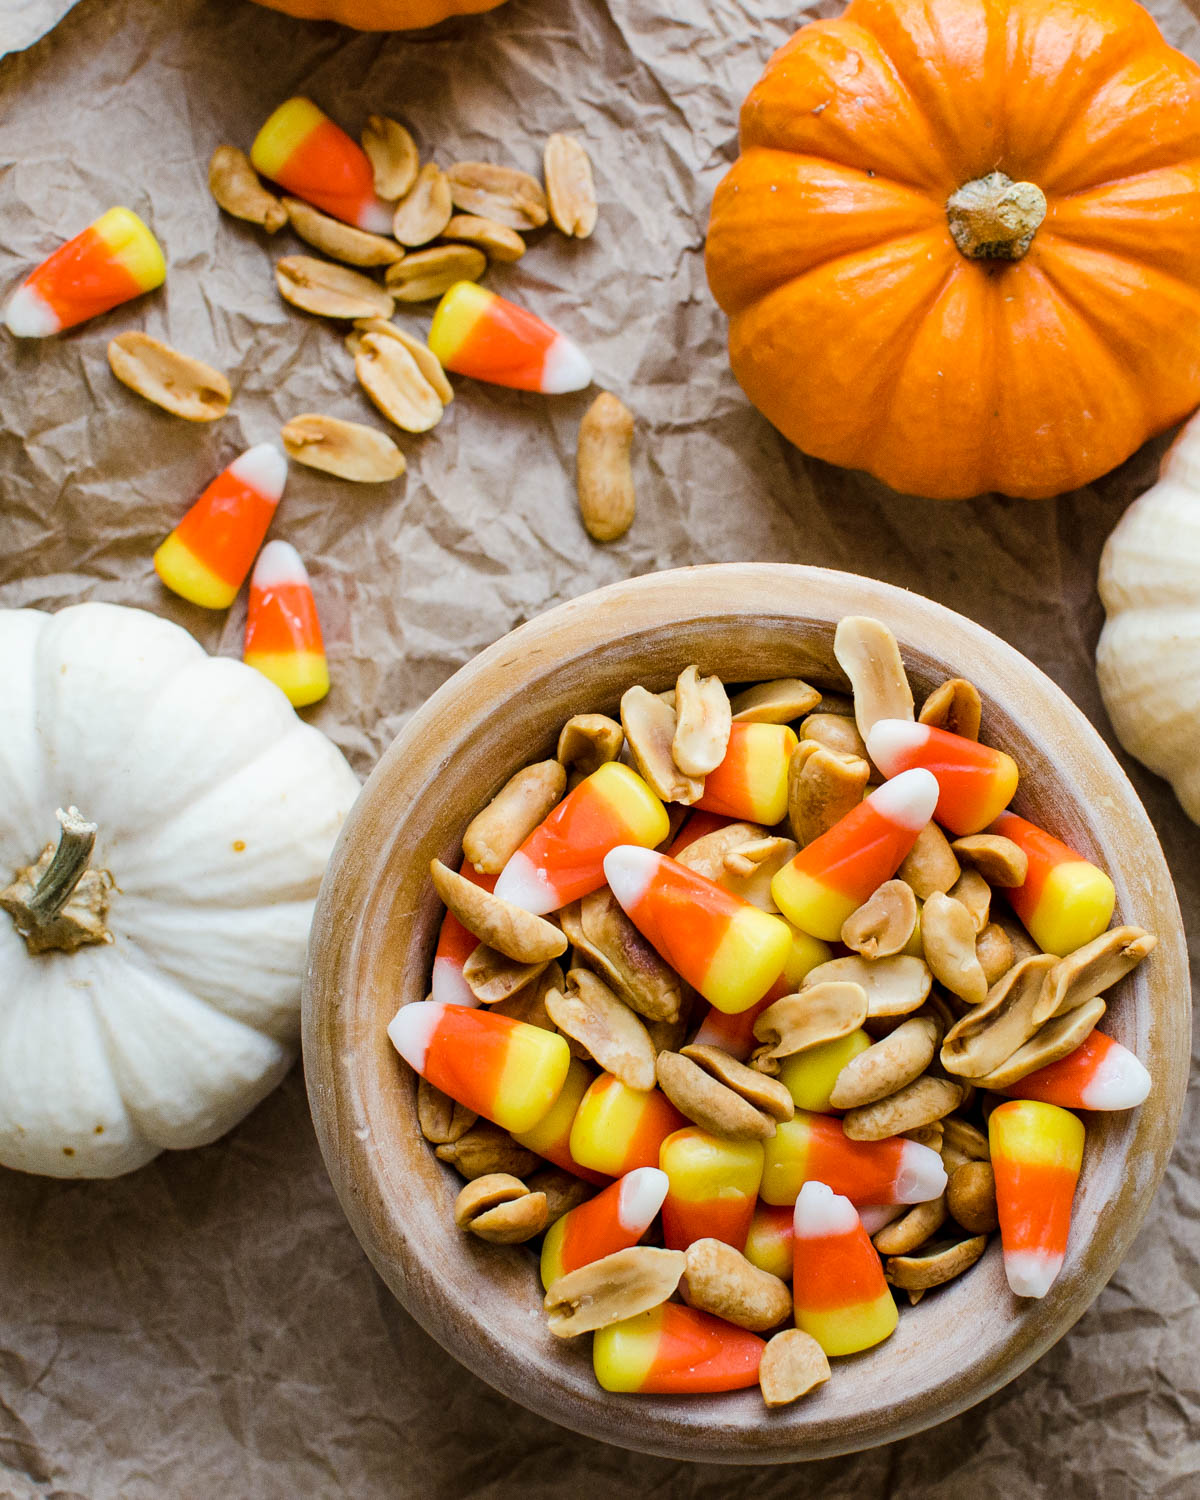 Serving the candy corn and peanuts in a wooden bowl.